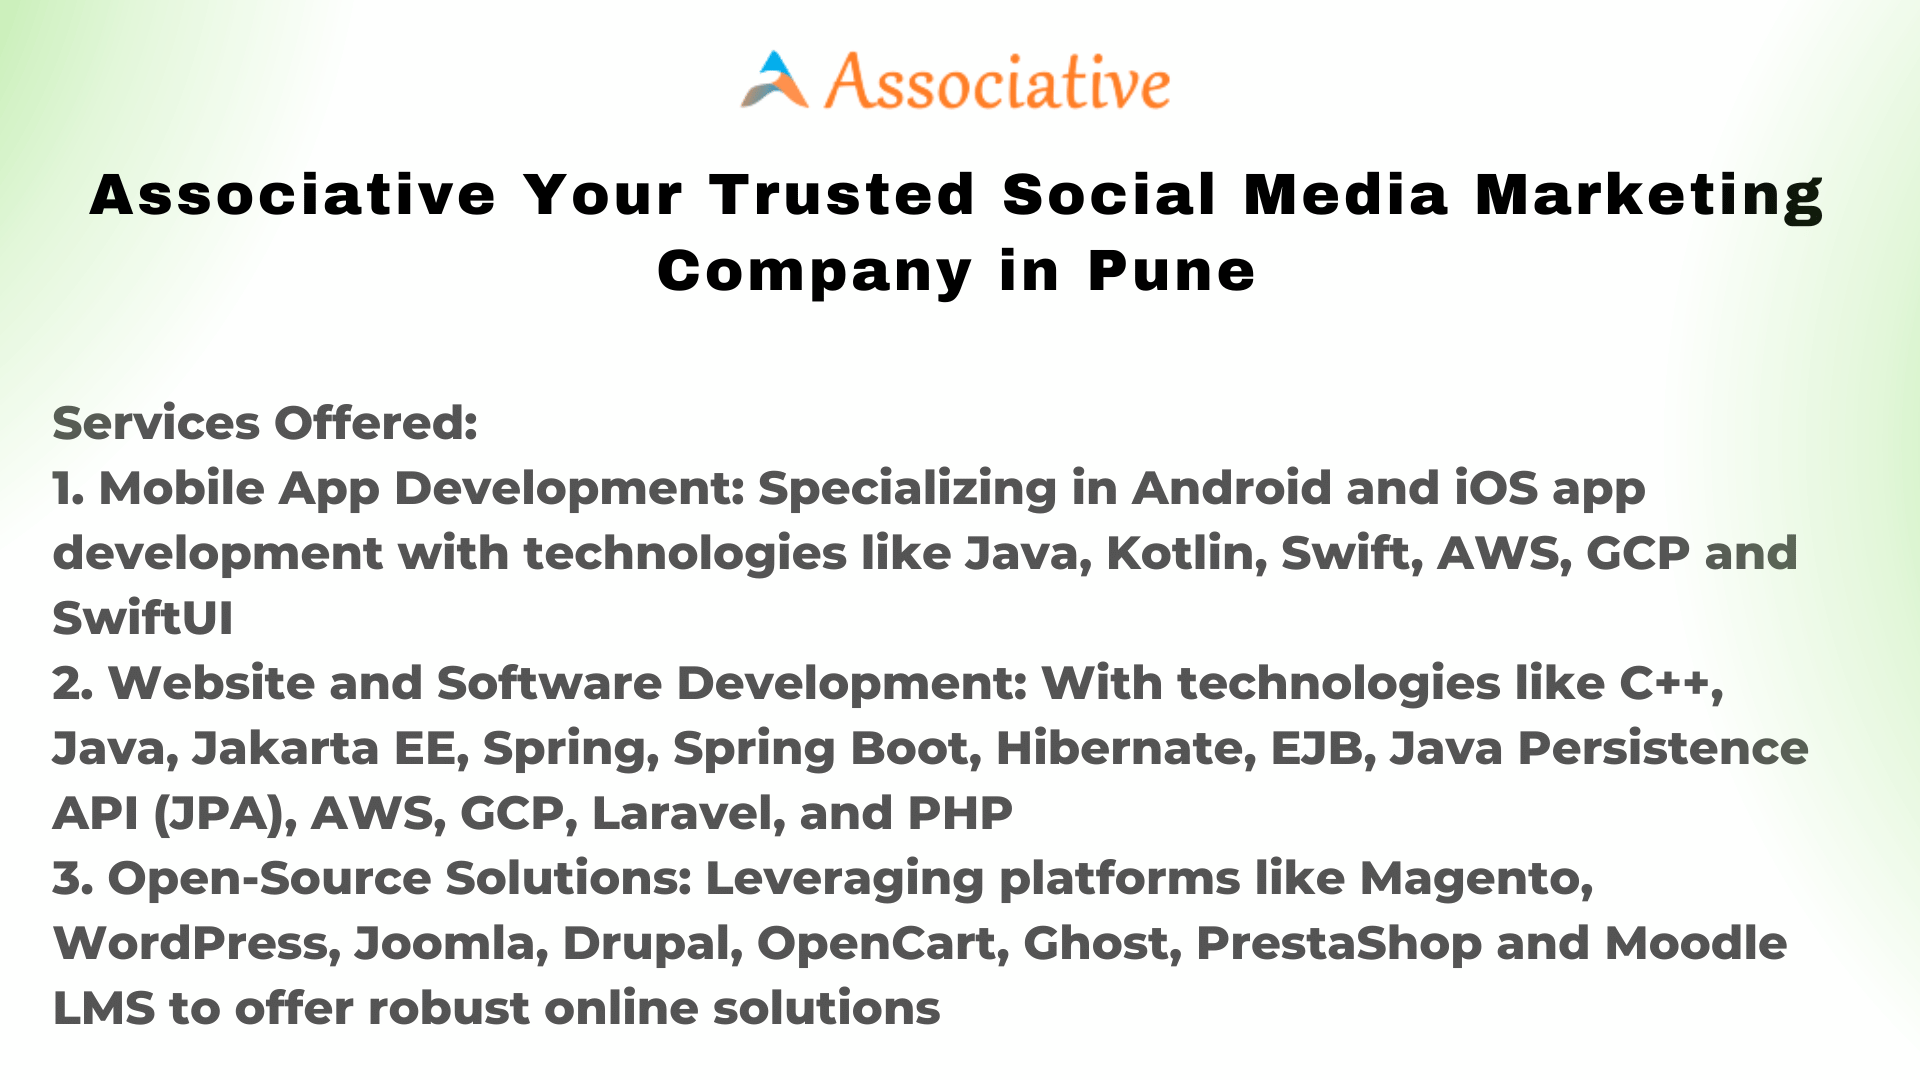 Associative Your Trusted Social Media Marketing Company in Pune